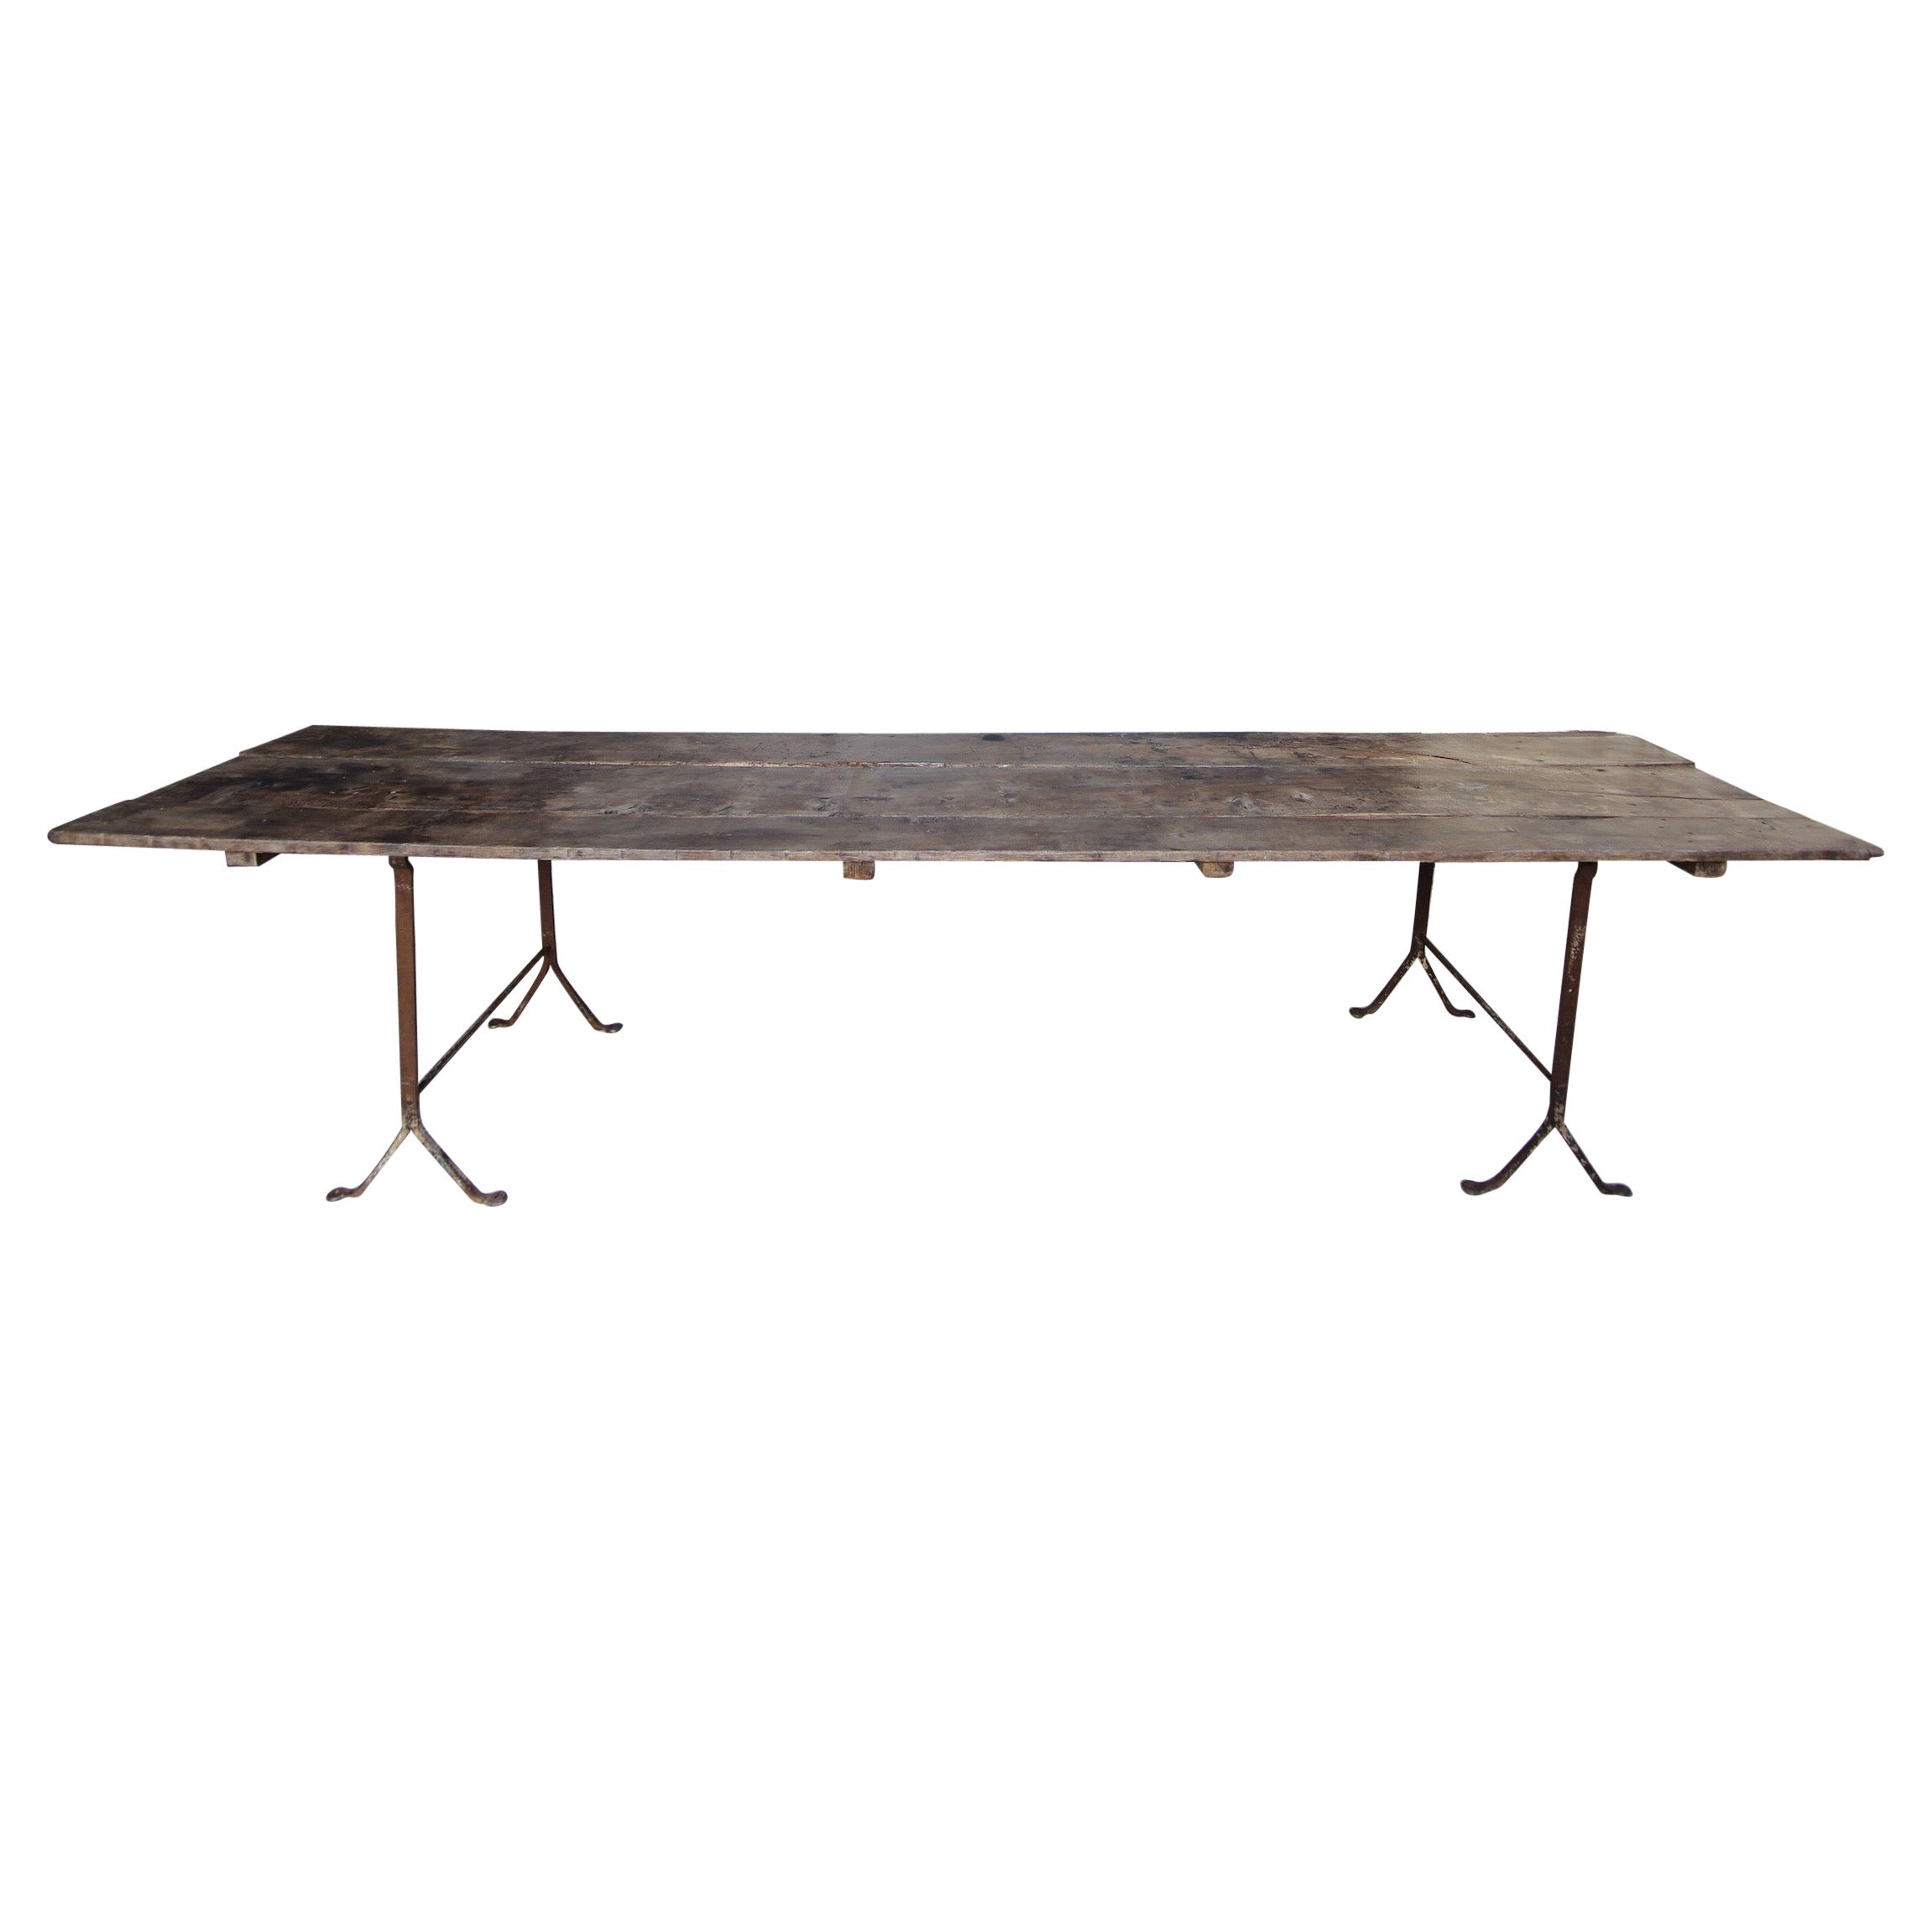 Large 20th Century Primitive Industrial Console Table